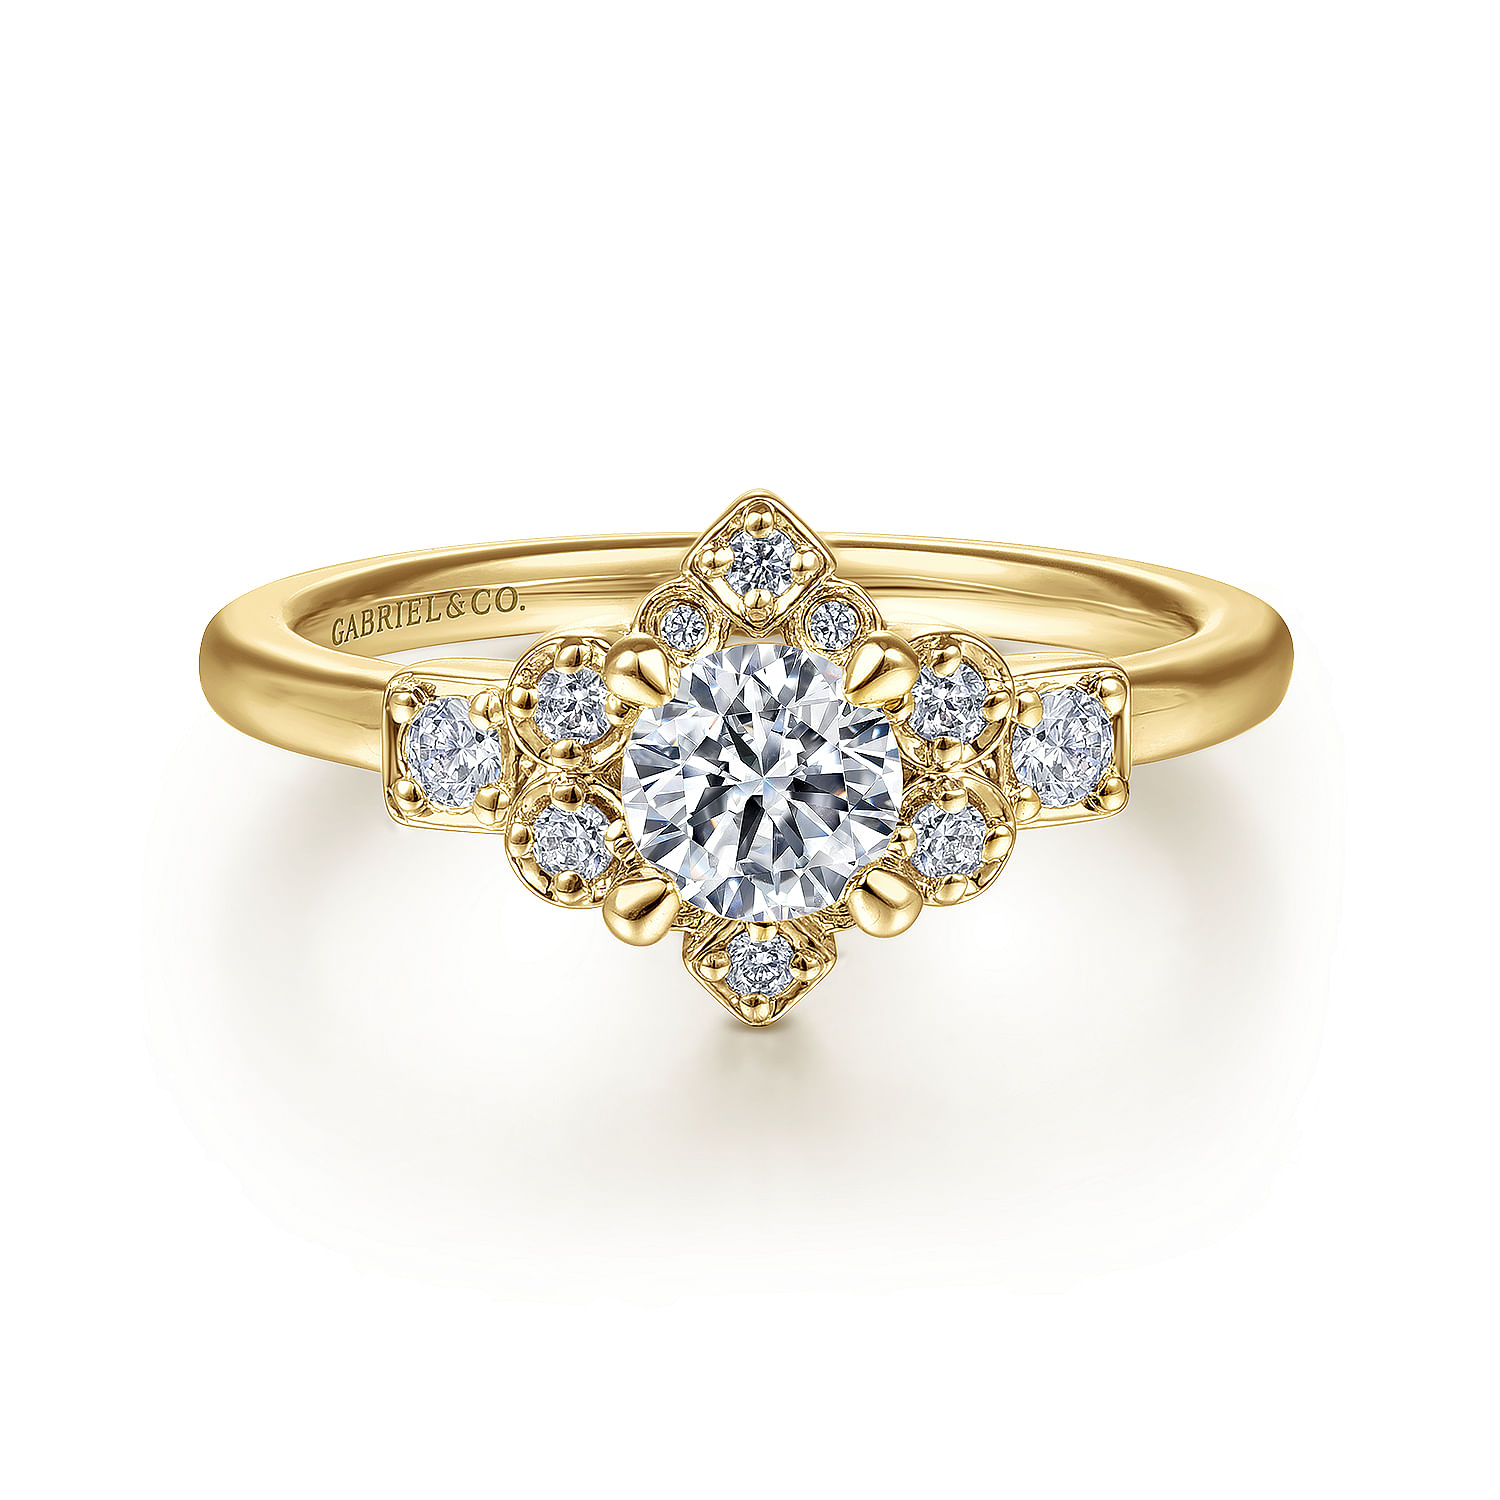 Raleigh---Unique-14K-Yellow-Gold-Round-Halo-Diamond-Engagement-Ring1